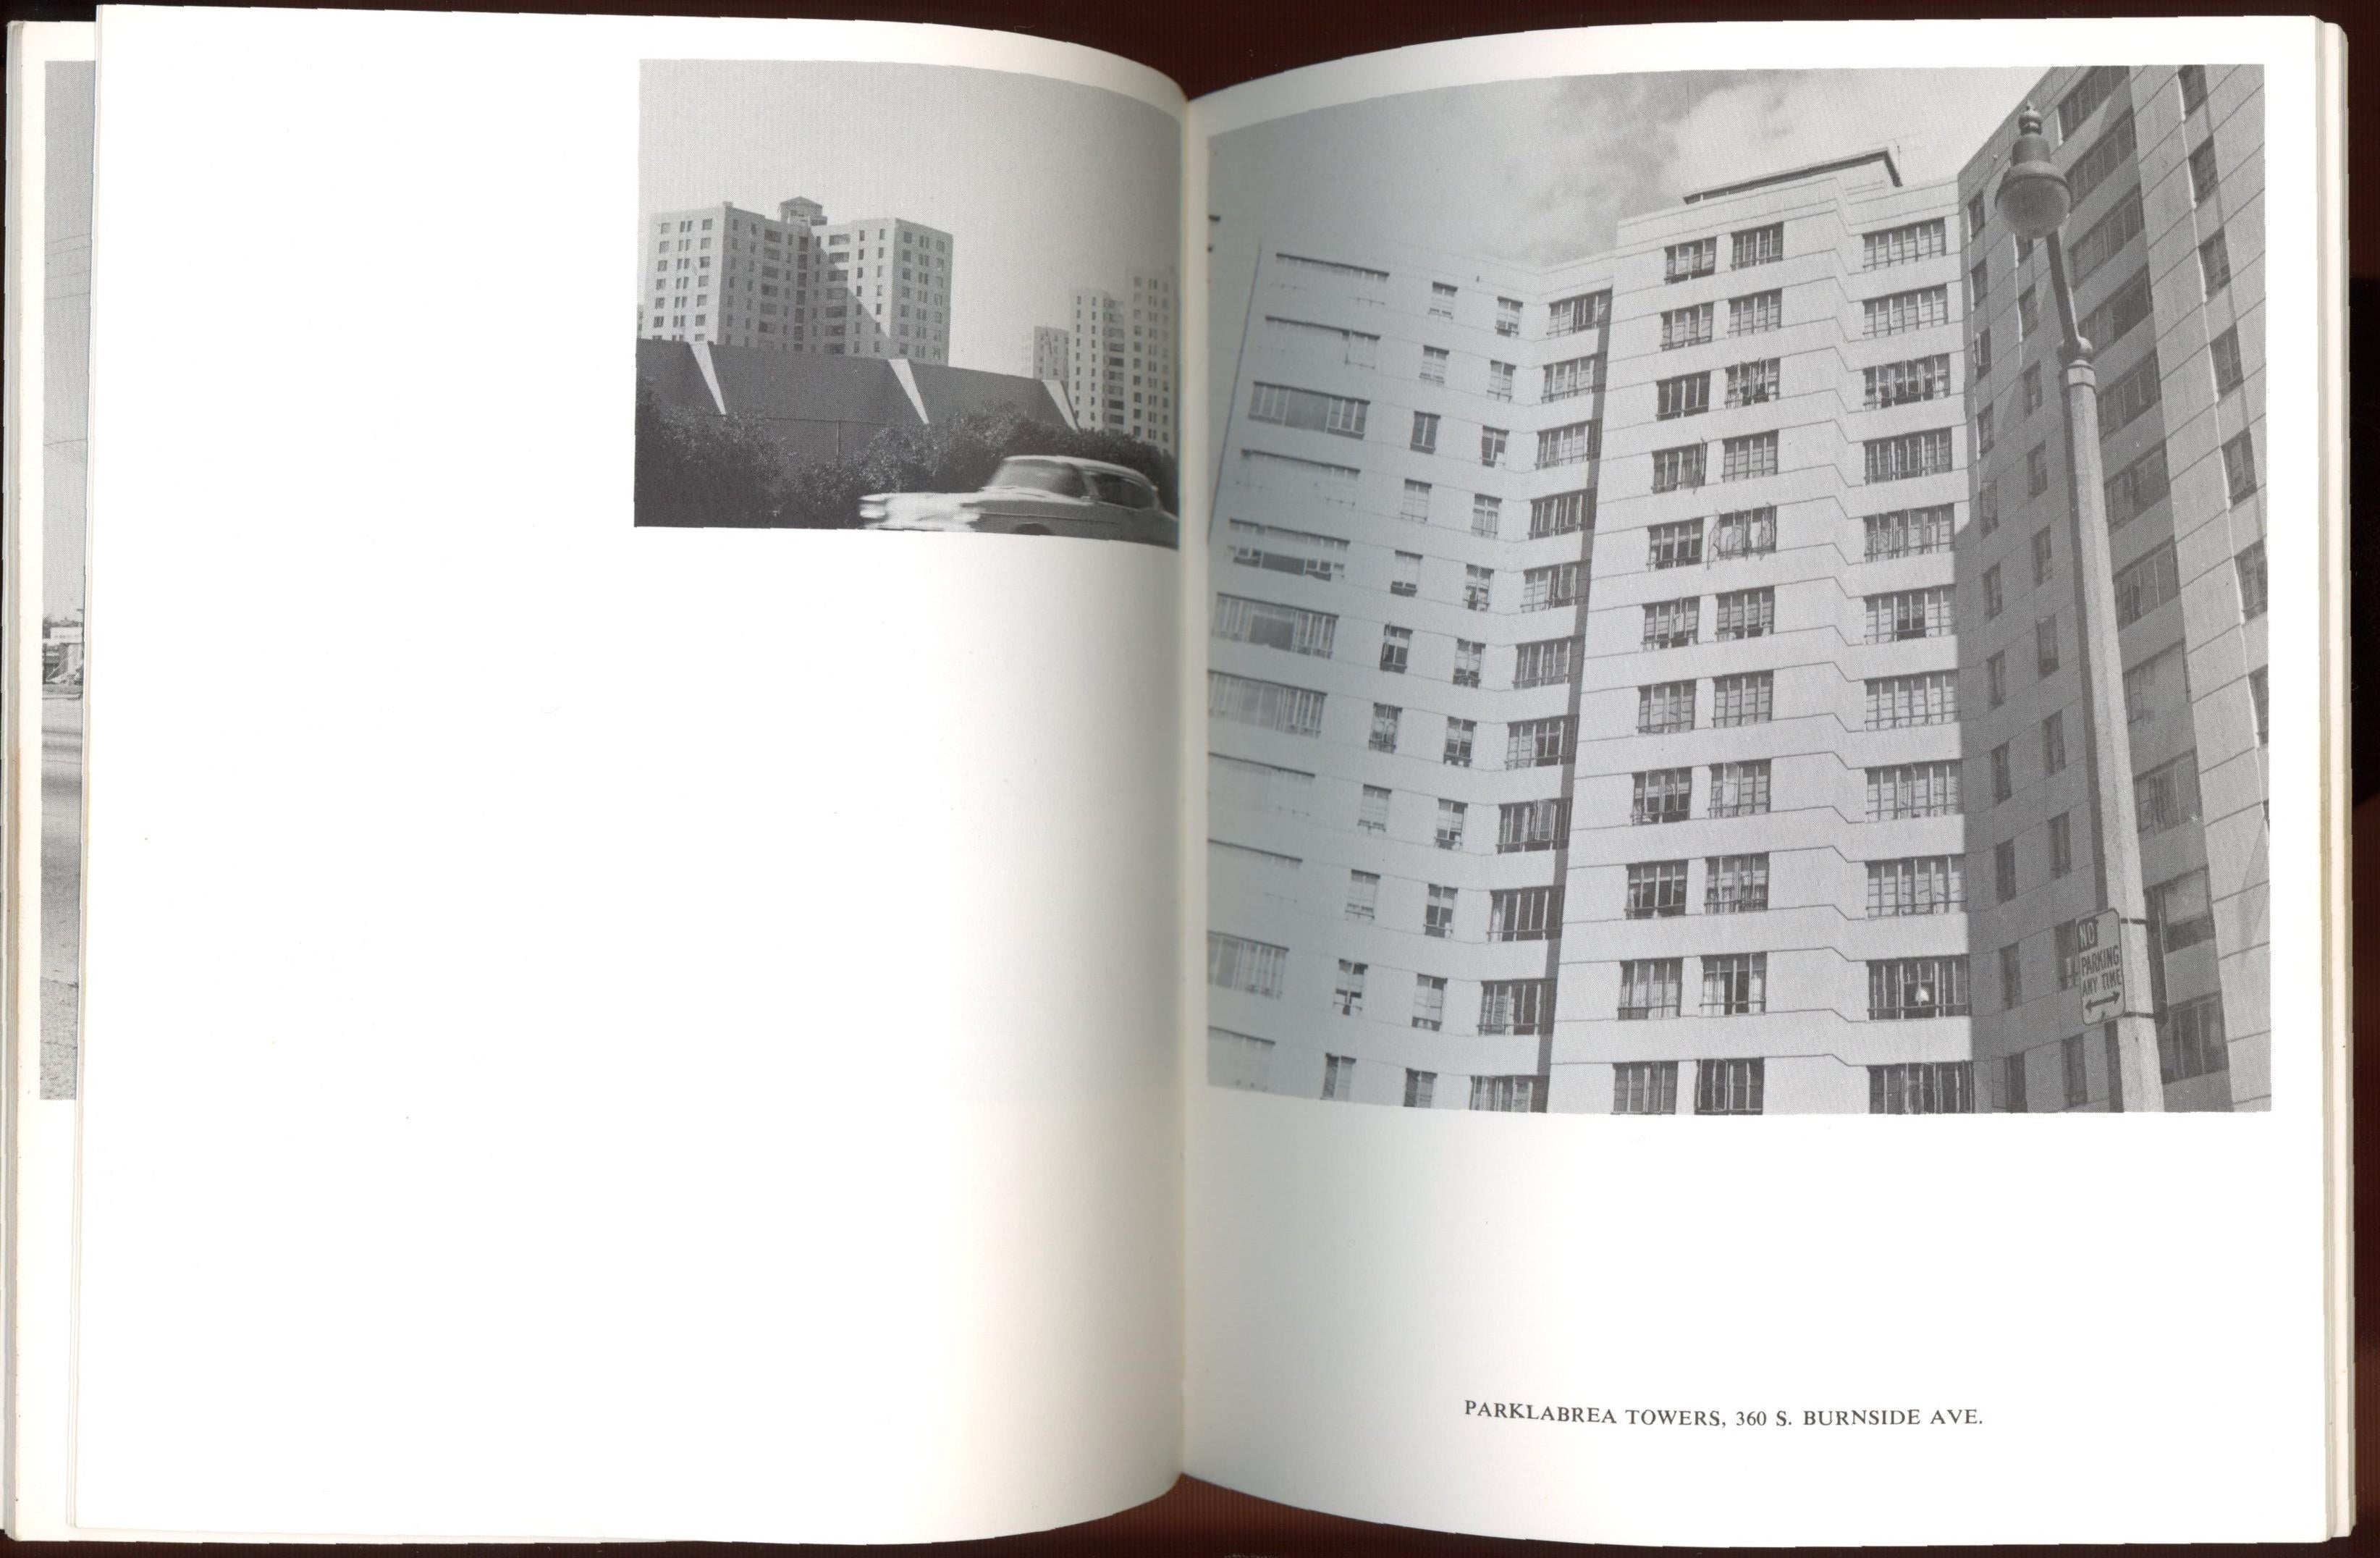 Some Los Angeles Apartments - Artist Book published in a limited edition of 3000 - Pop Art Photograph by Ed Ruscha